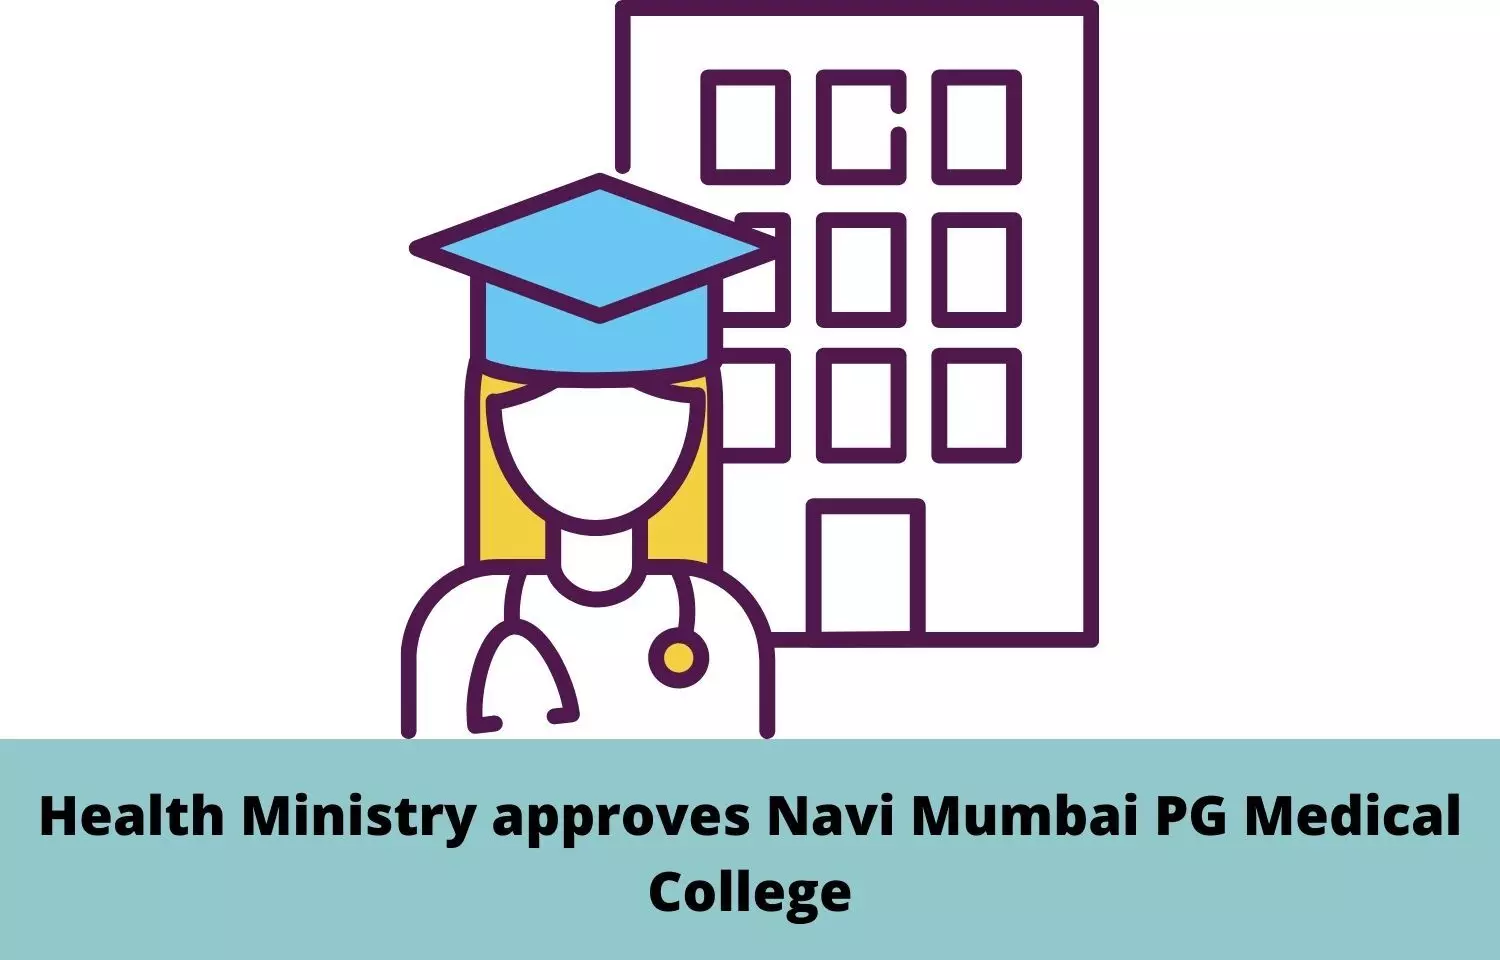 Health Ministry approves Navi Mumbai PG Medical College